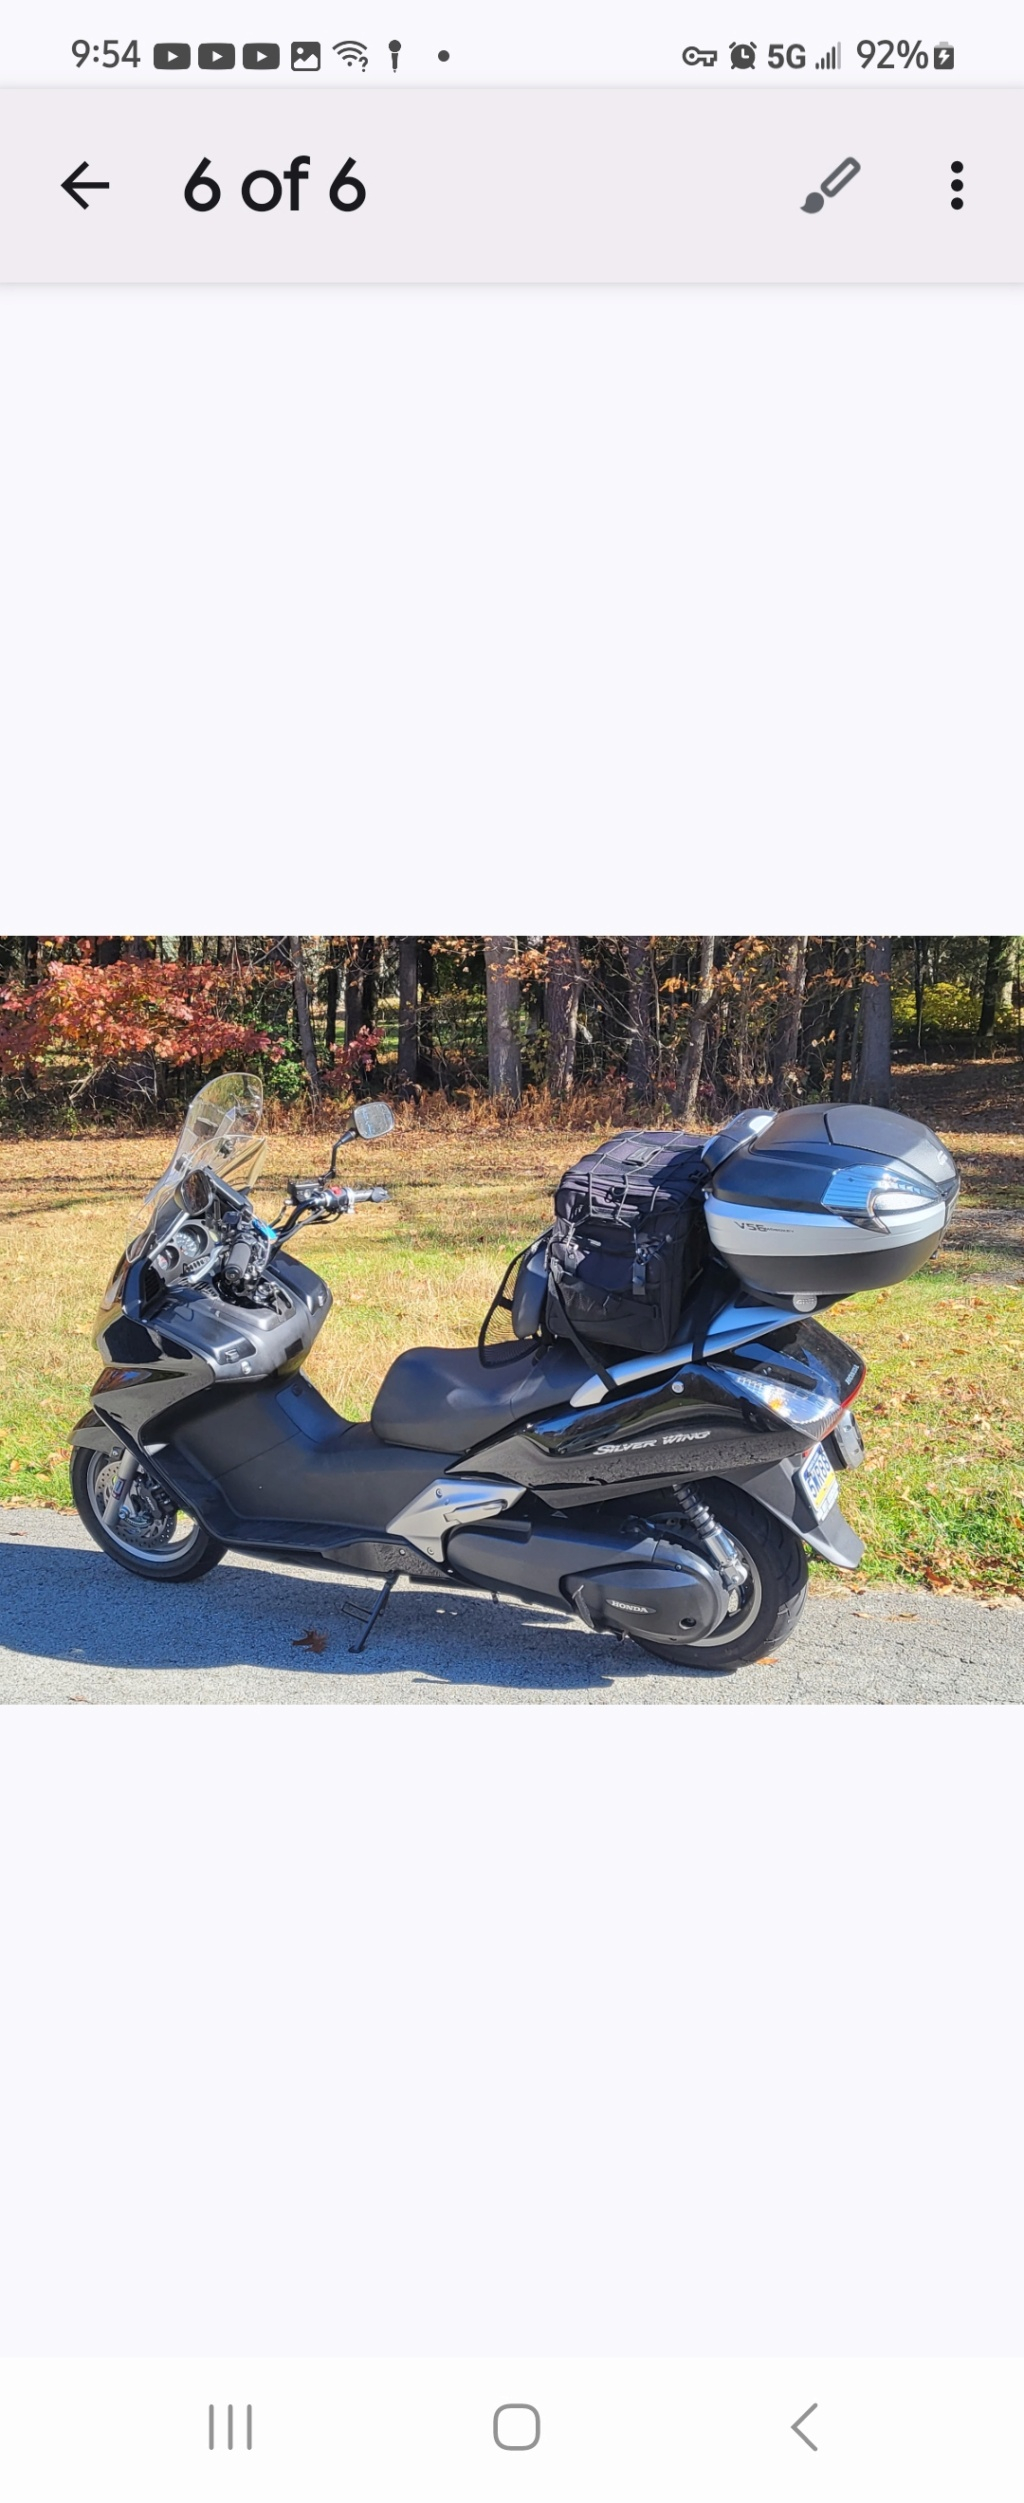 2012 Honda Silverwing, For Sale  Immaculate, very Low Miles! Screen15